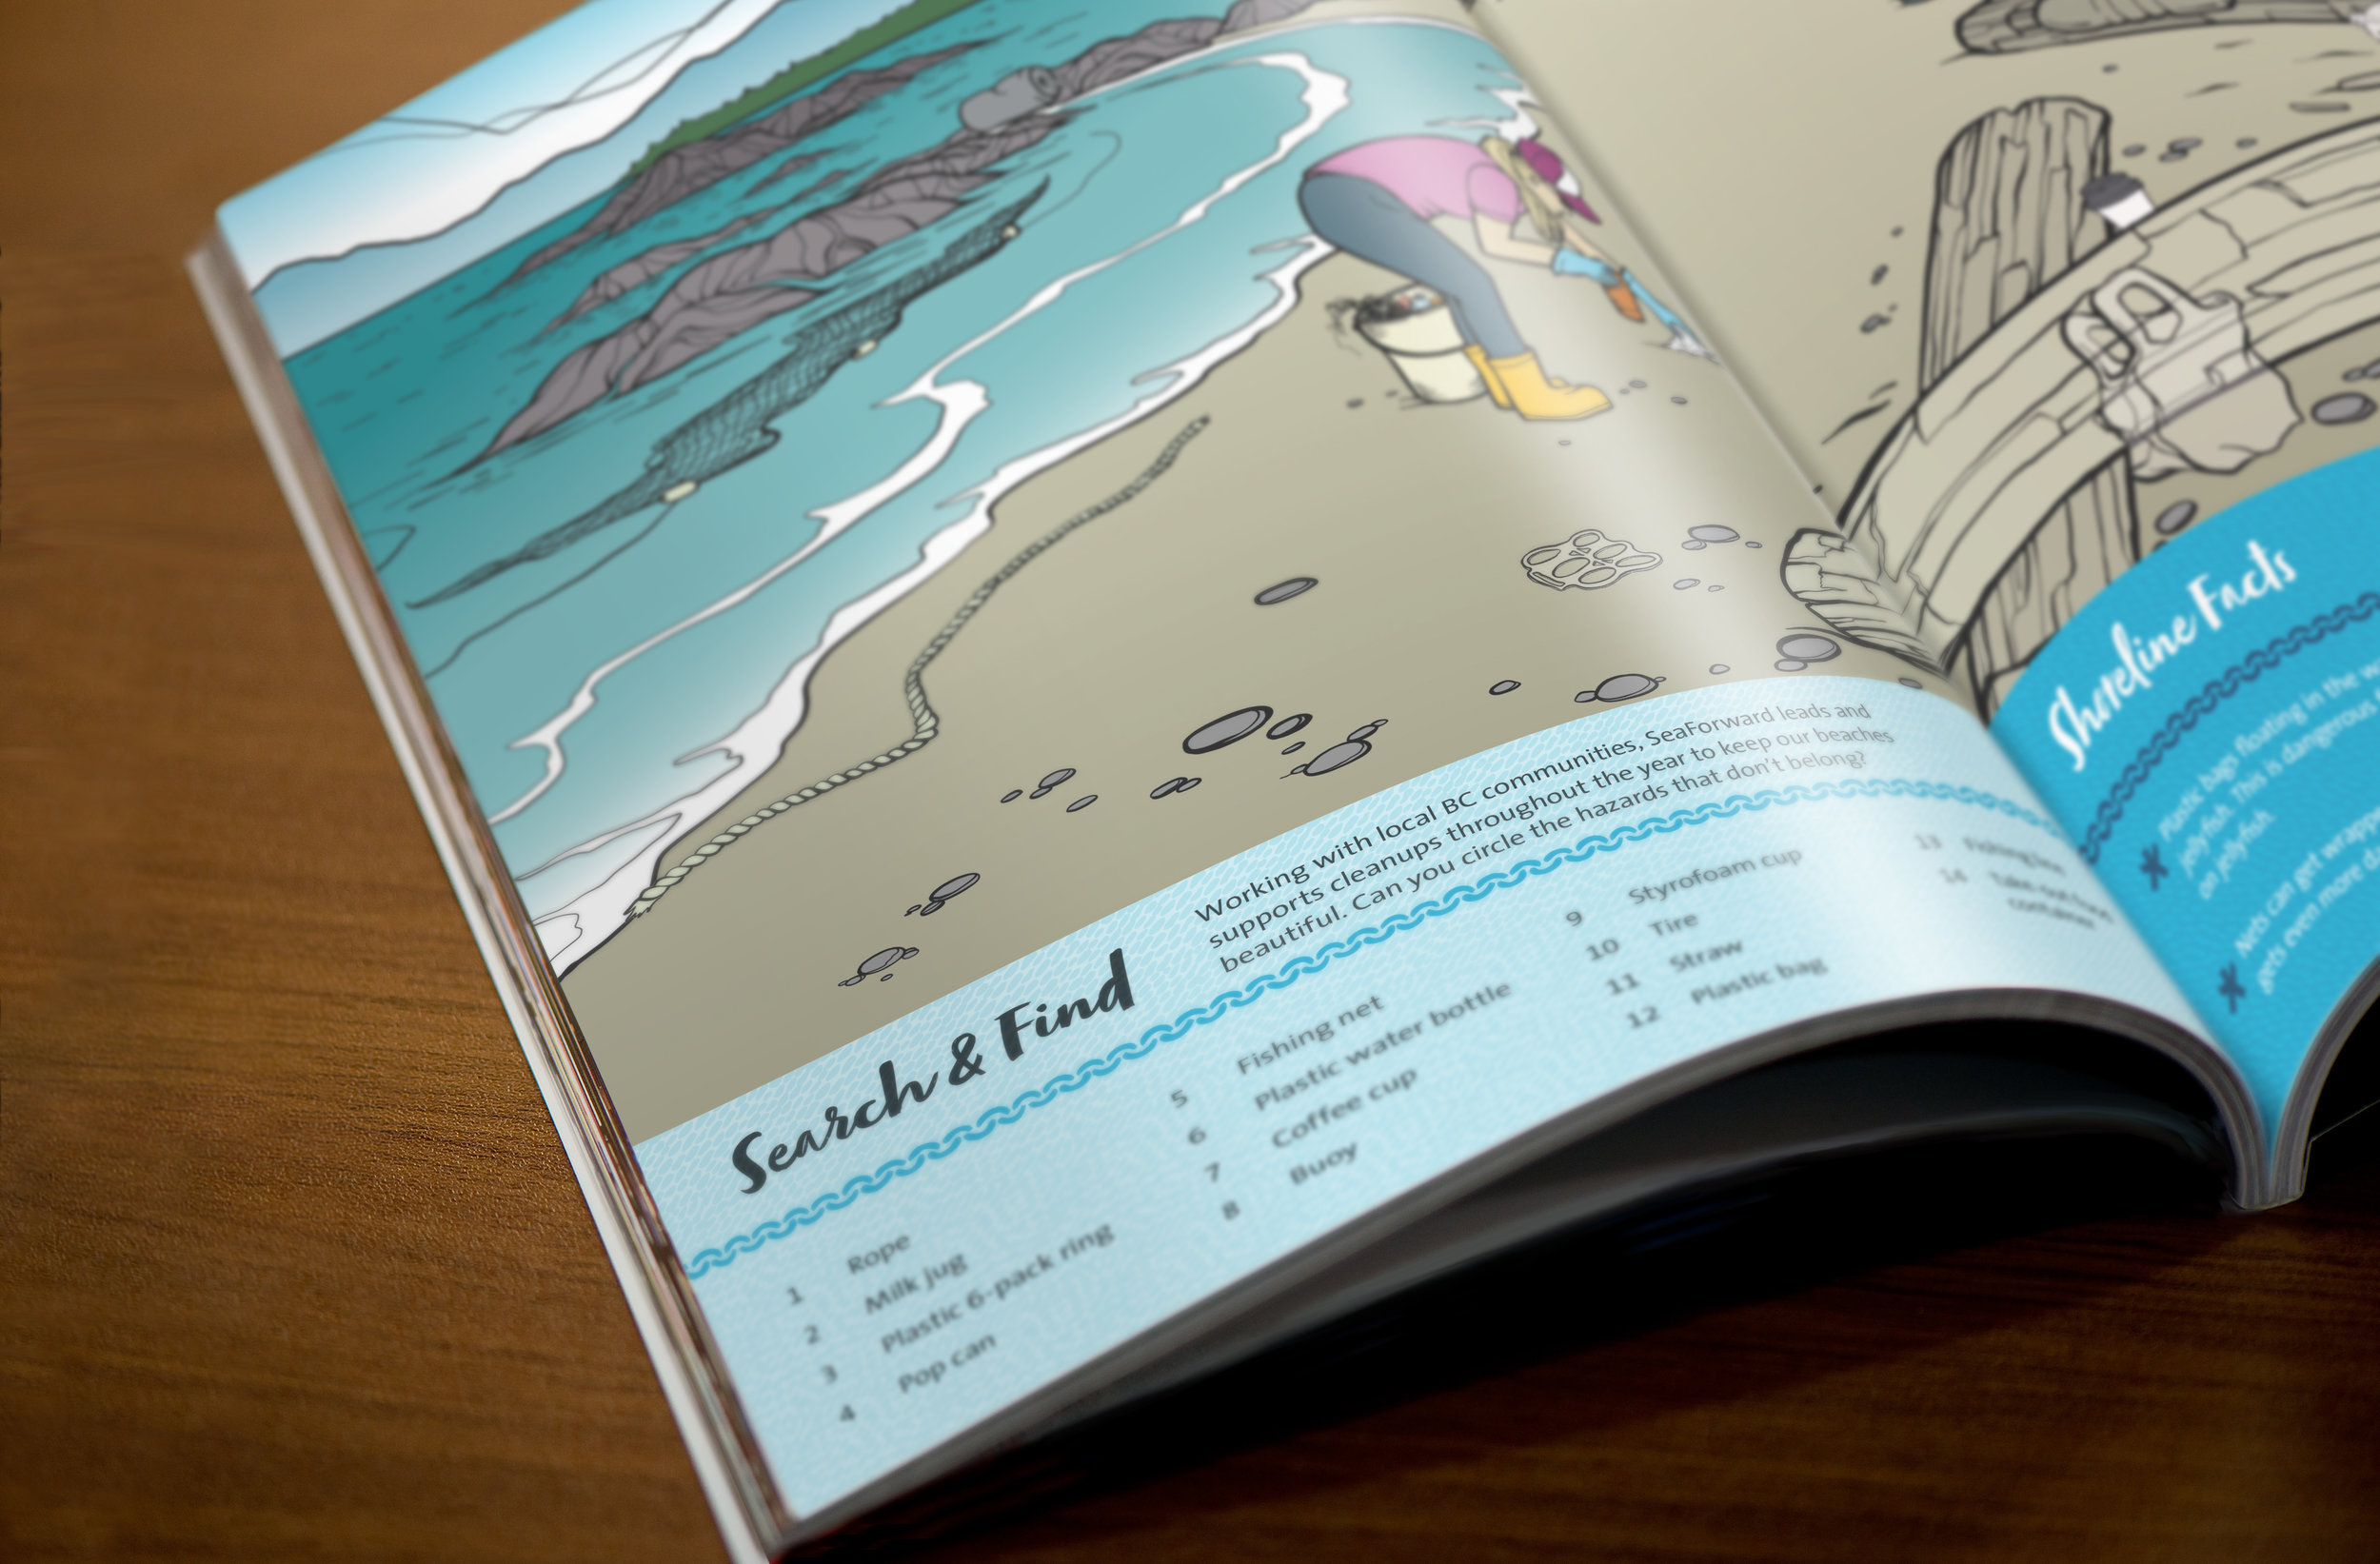 BC Ferries - Sea Forward Activity Book // Search and Find Illustration